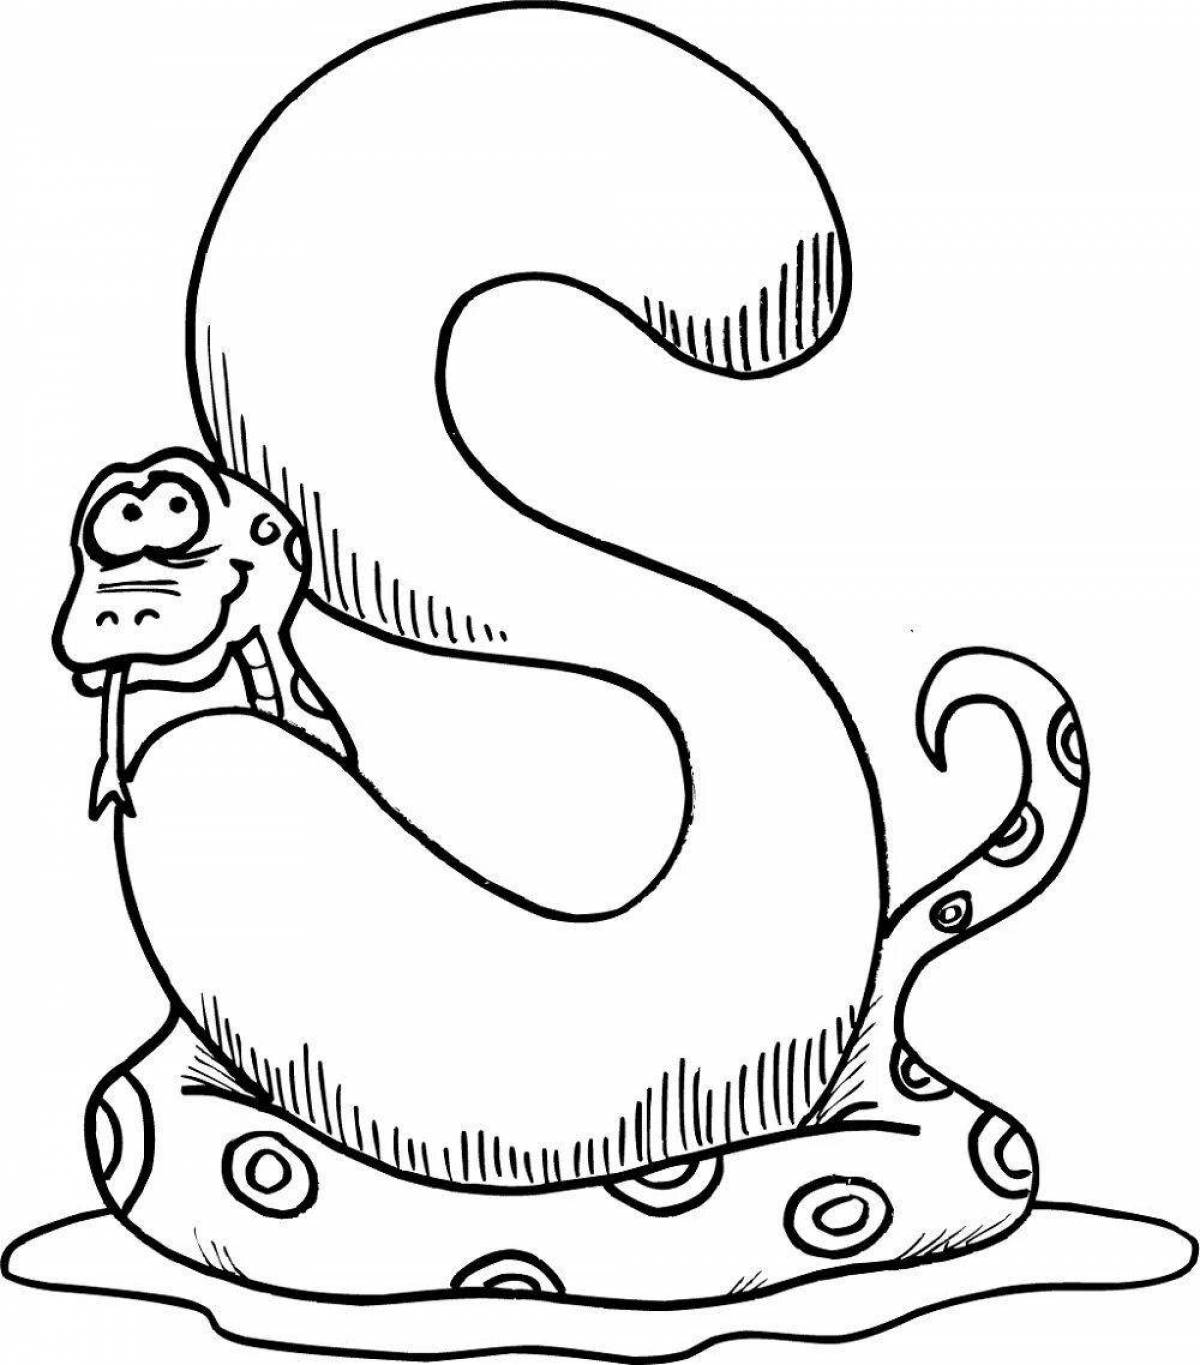 Coloring nice letter s